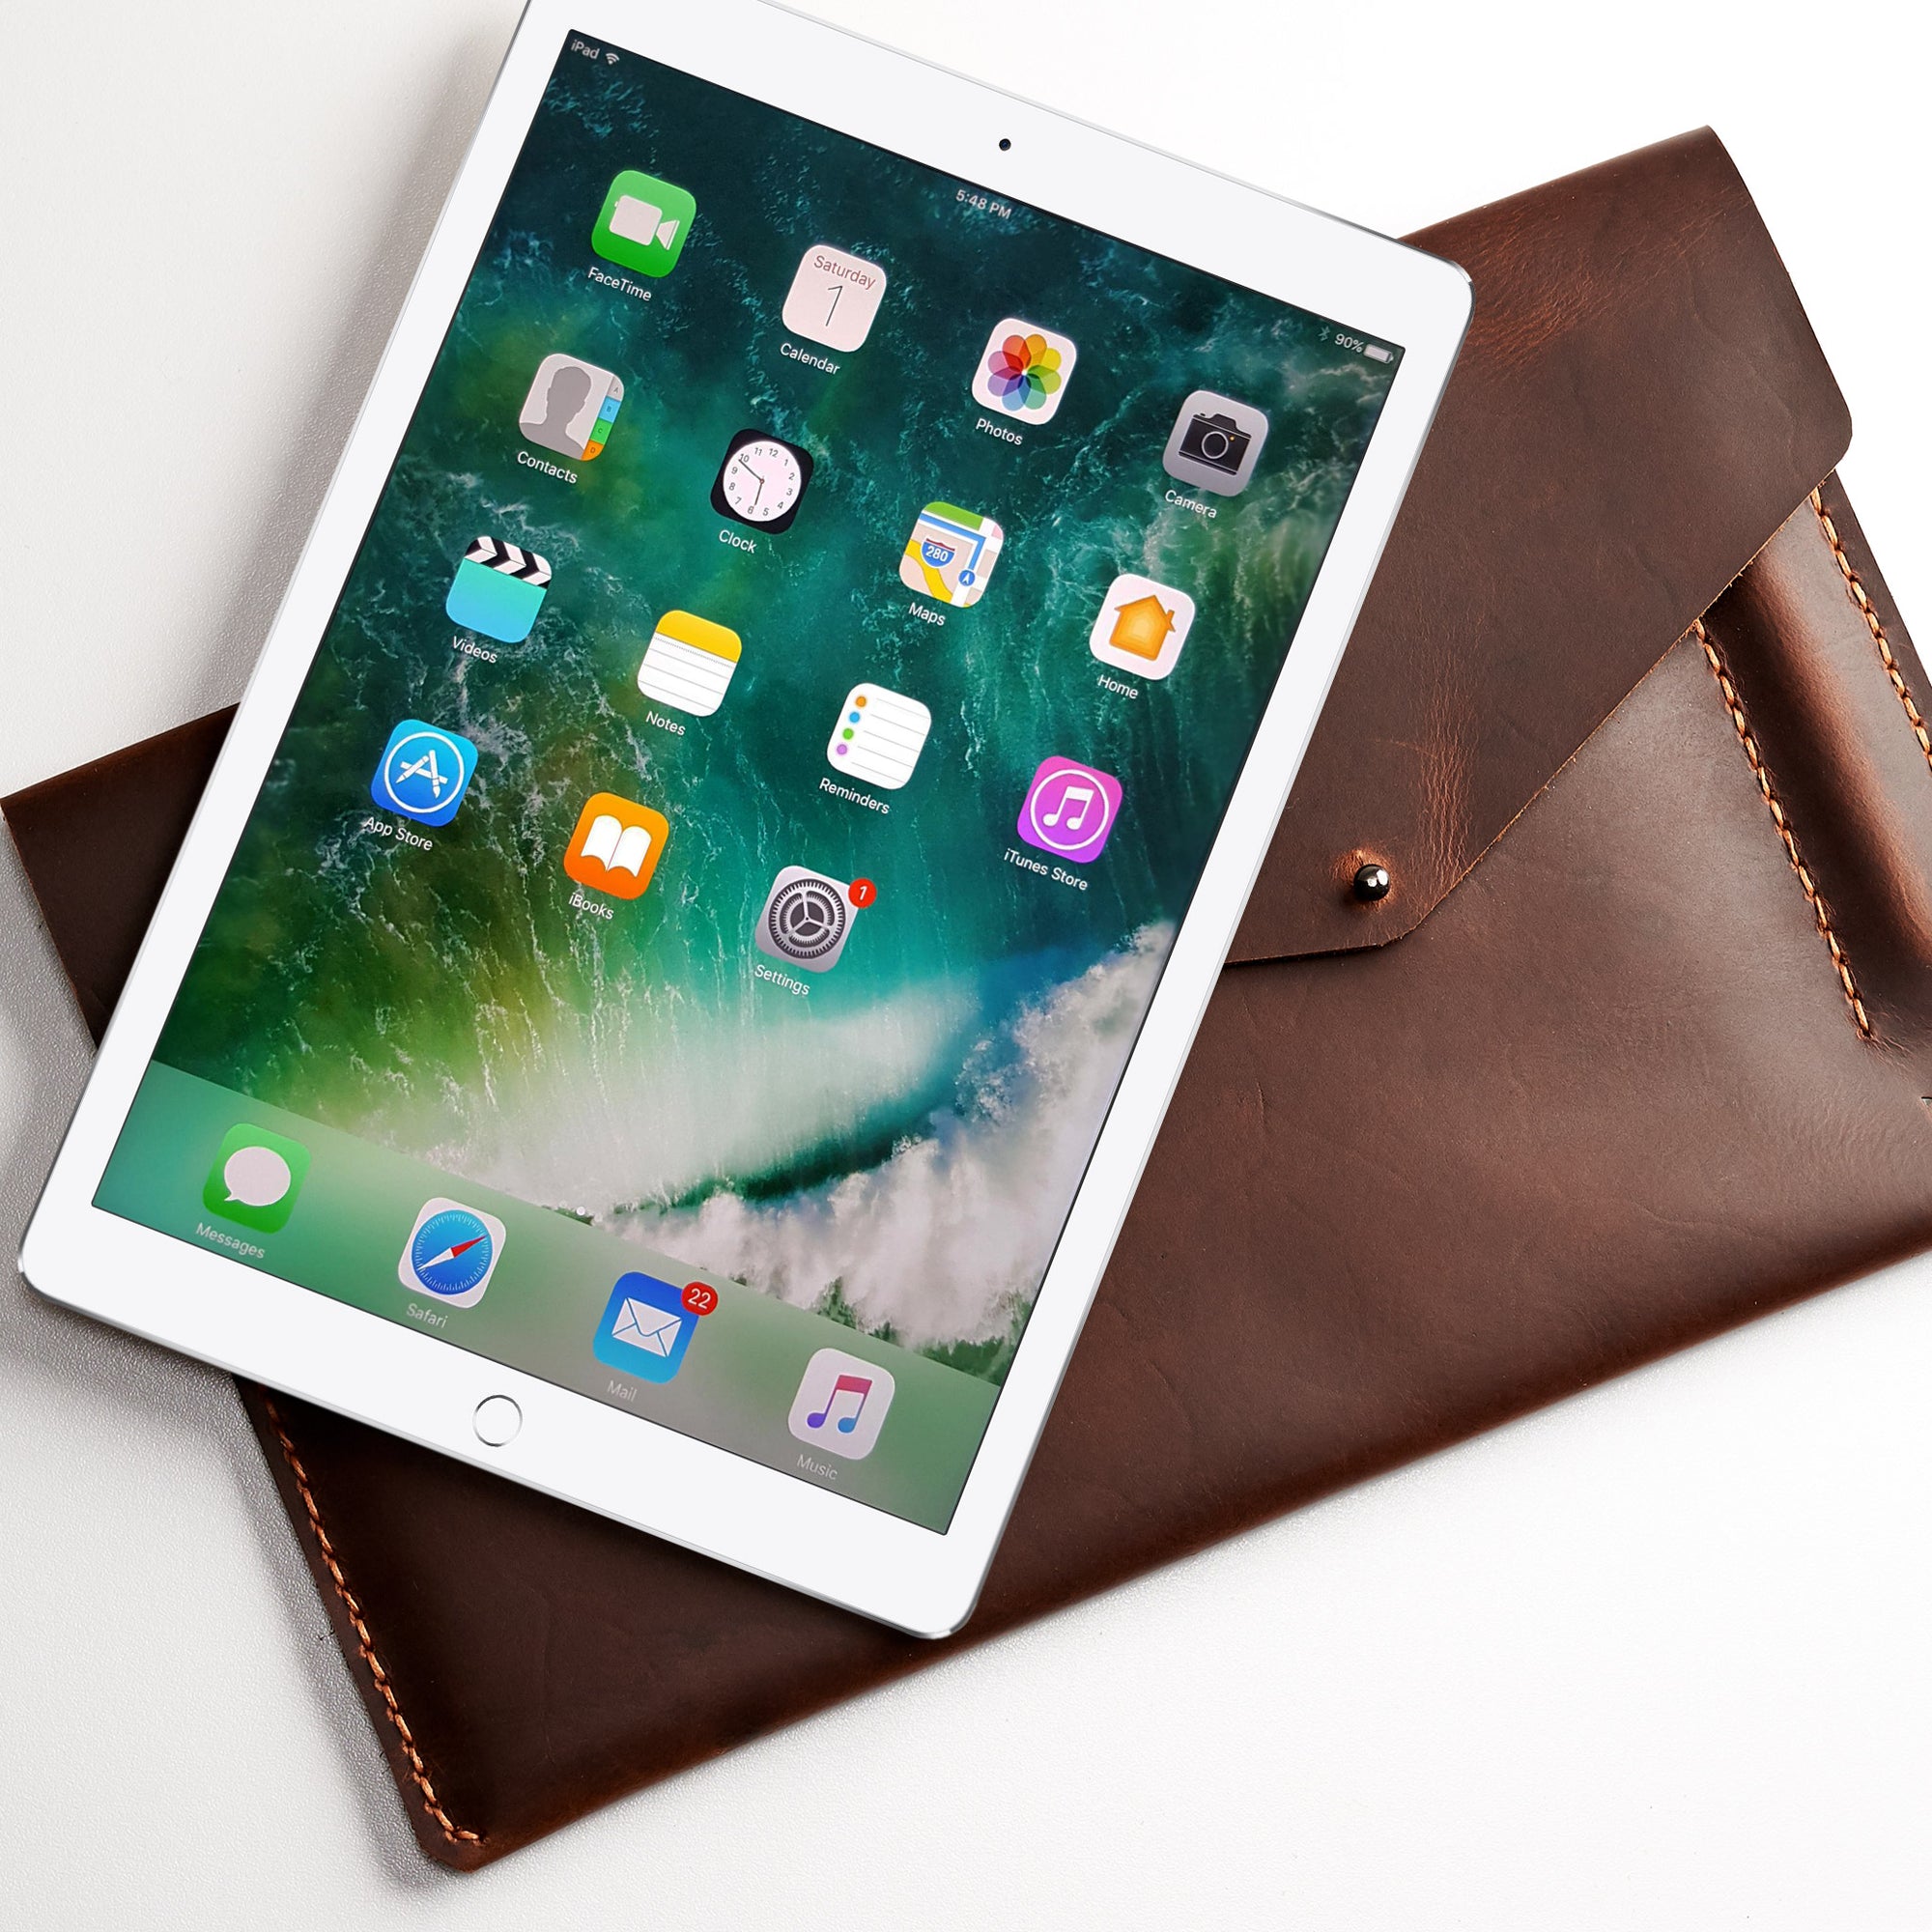 Apple mens case. Tan leather sleeve for iPad pro 10.5 inch 12.9 inch. Mens gifts